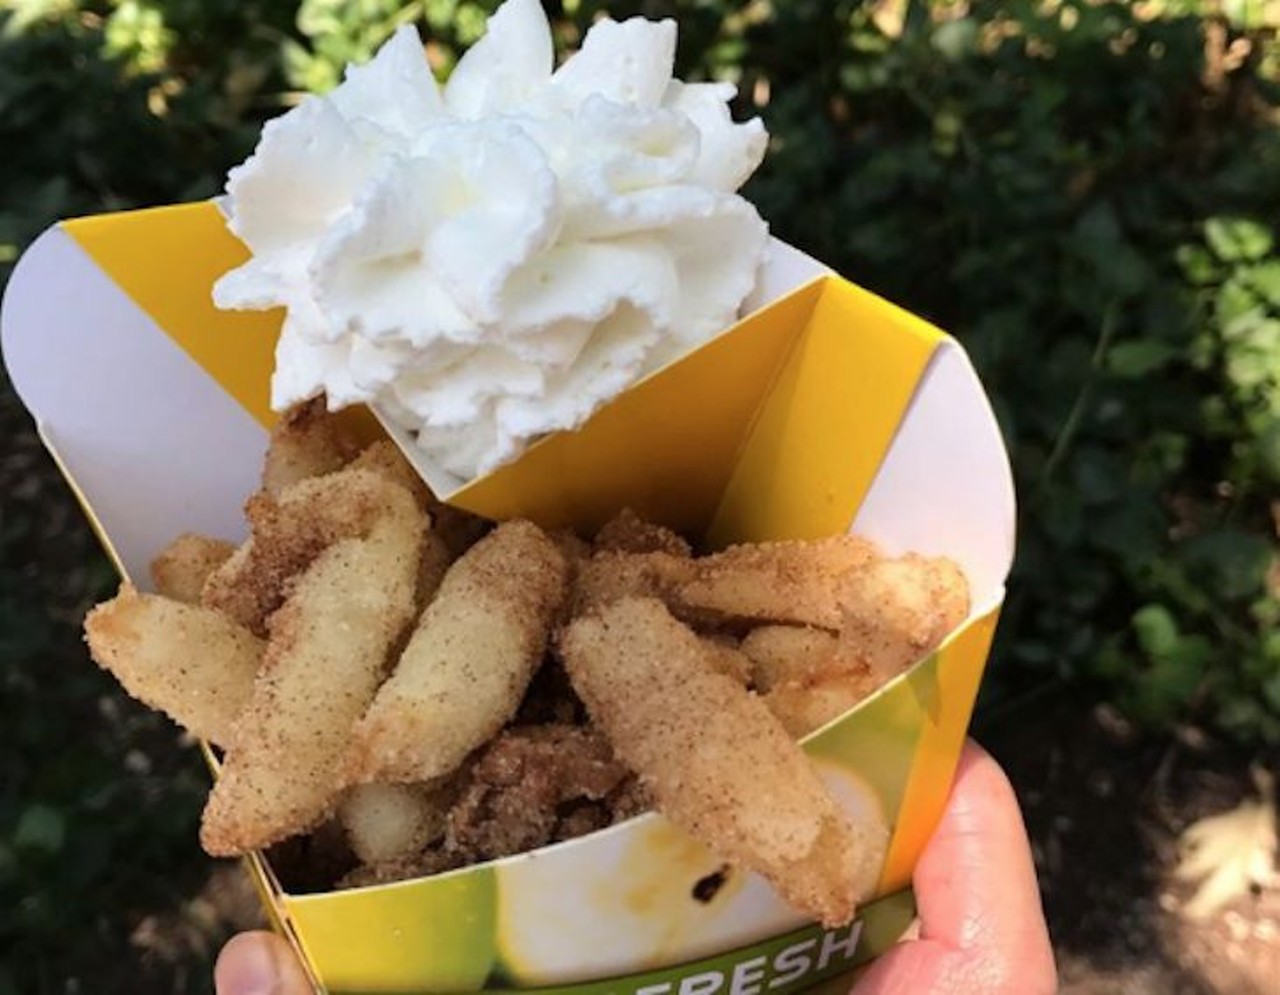 Lego Land
Granny&#146;s Apple Fries
Arguably healthy fried fruit slices combine baked sugar with cinnamon and whipped cream. 
Photo via Legoland